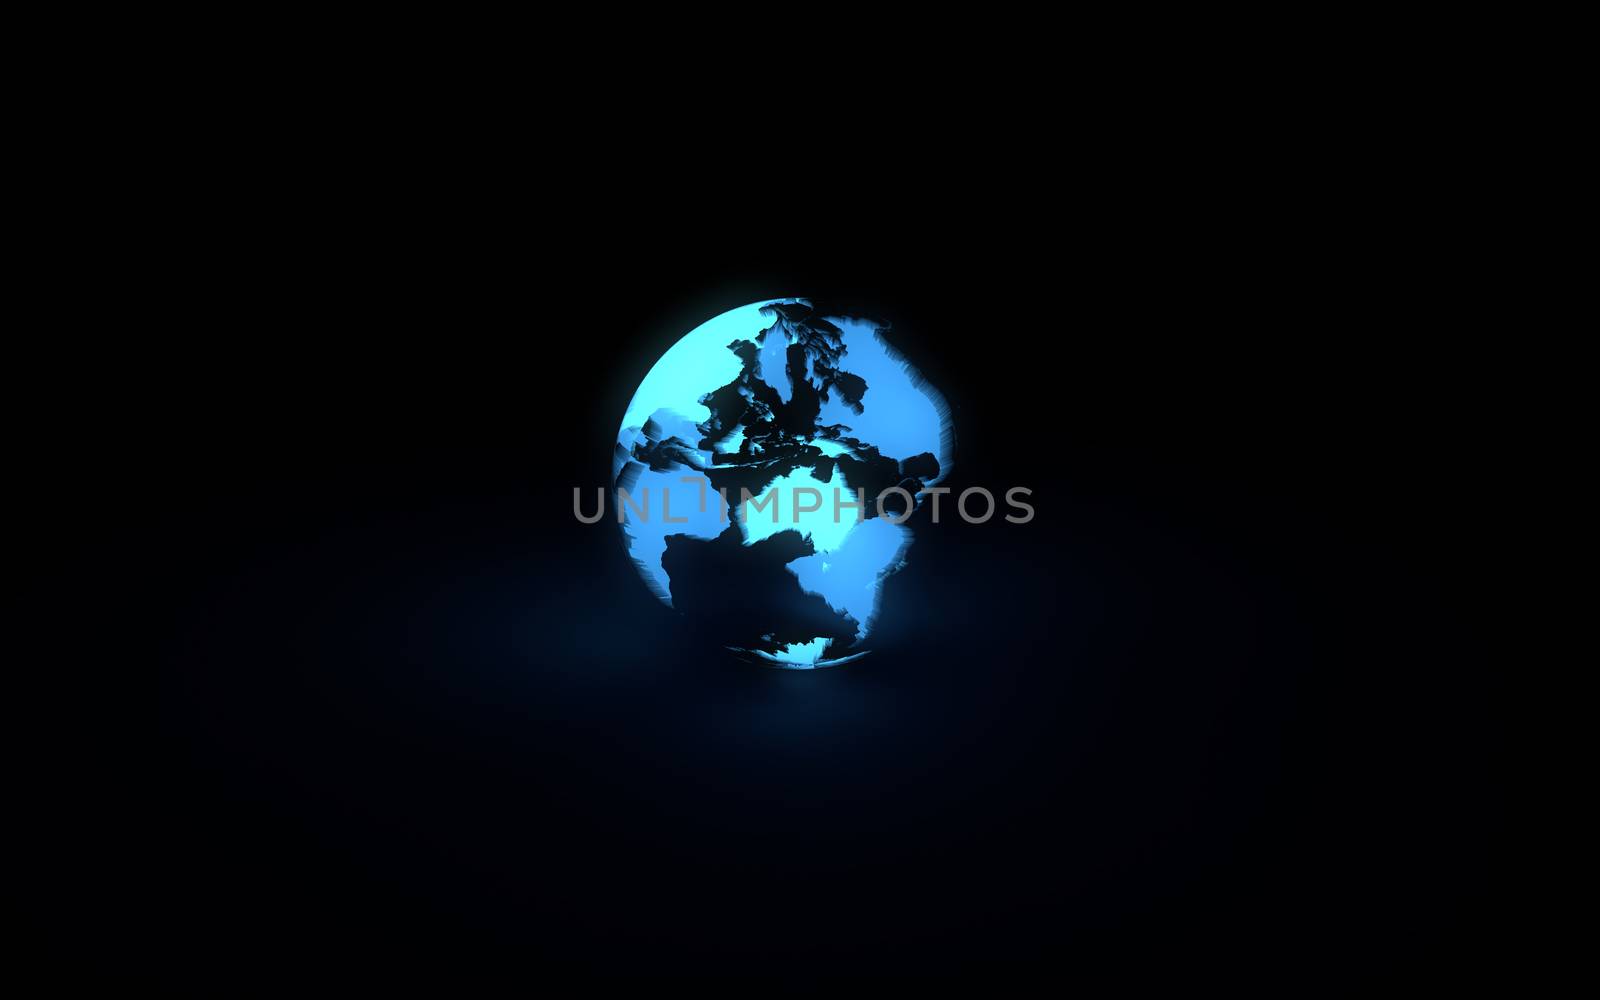 Abstract 3d model of blue glowing earth globe on black background. Front Australian continent